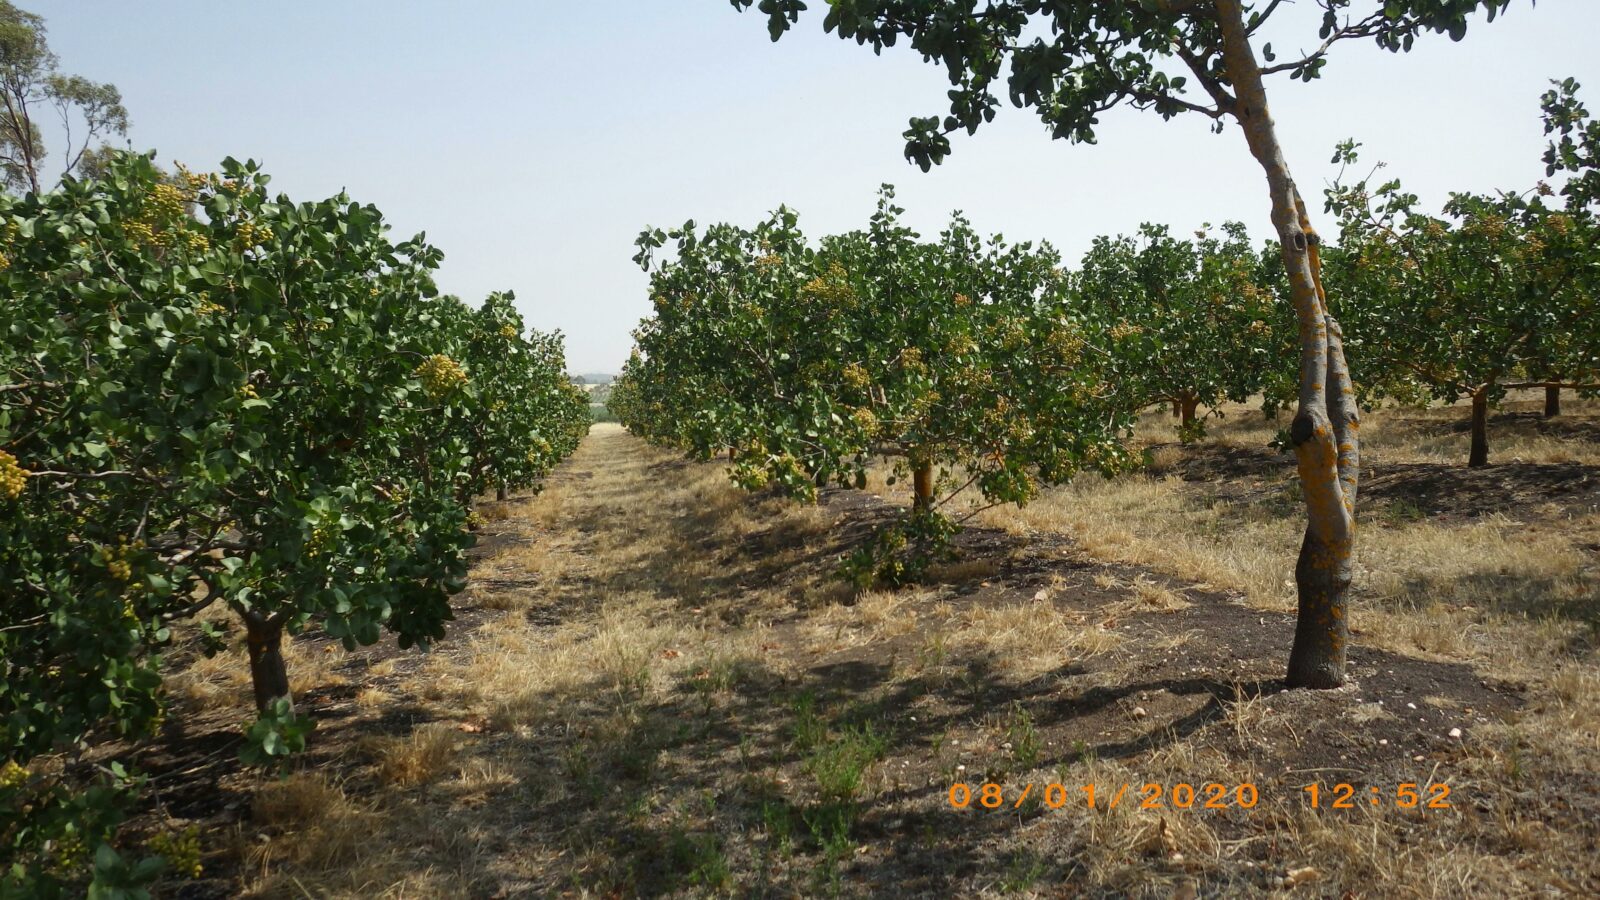 Pistachio orchard 2 mths before harvest